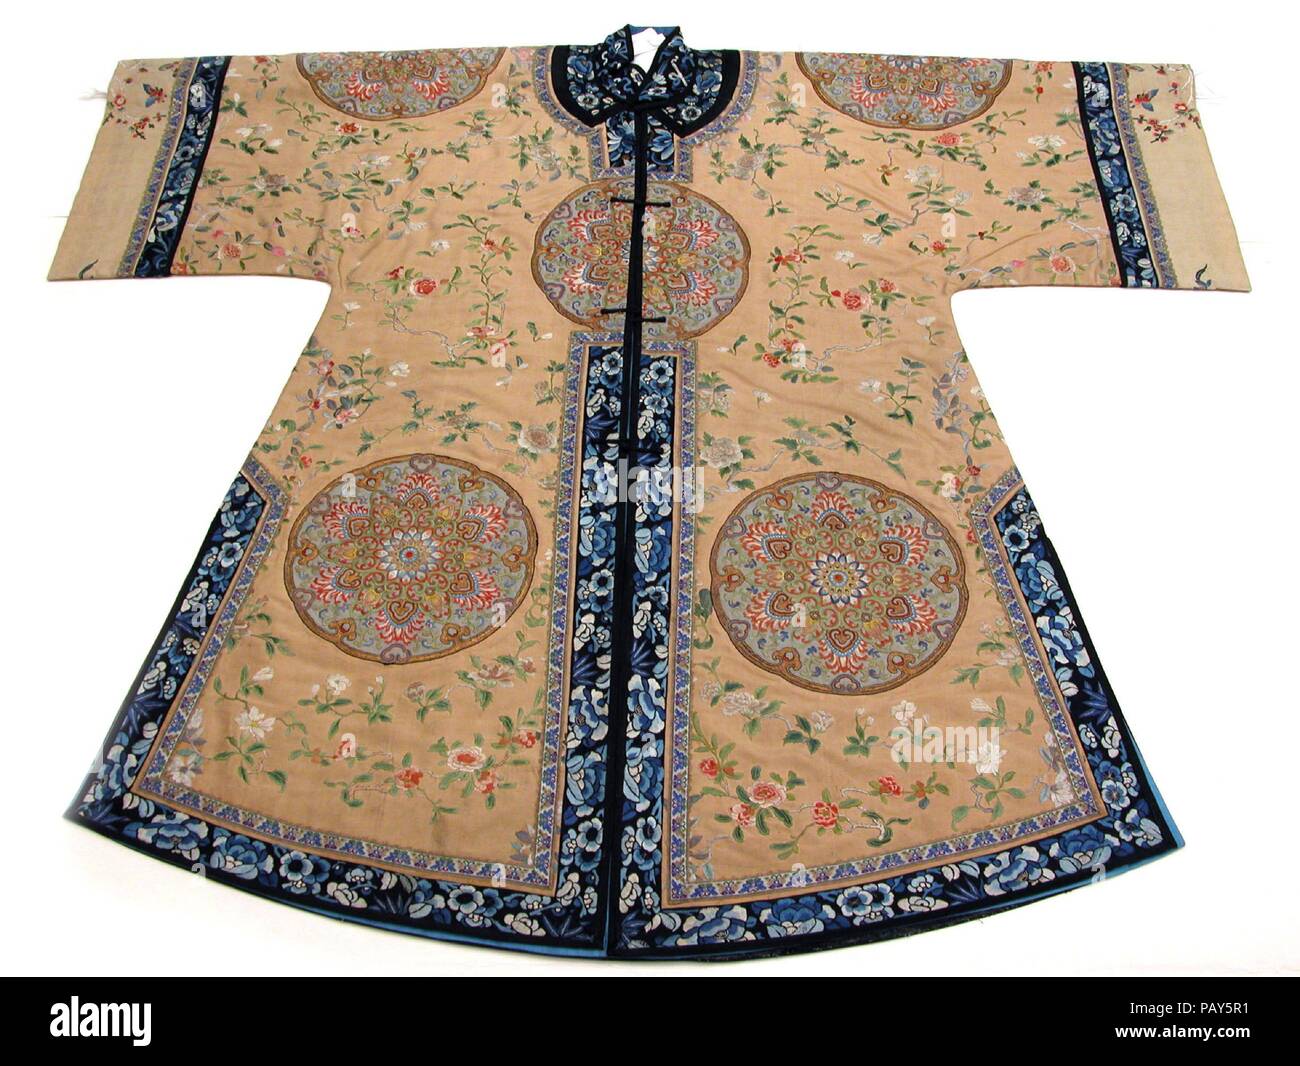 Woman's Informal Coat with Large Rosettes. Culture: China. Dimensions: Overall: 44 x 52 in. (111.8 x 132.1cm). Date: 18th century.  Roundels and rosettes have a long history in China, dating back to the seventh century. The embroidered rosettes on this robe are particularly notable for their fine detail. They are on a nearly hidden light-blue background and were set in, not applied to the surface of the garment, which features a subtly contrasting light-golden-yellow background embroidered with flowering branches. Exquisite robes such as this one were often refurbished for succeeding generatio Stock Photo